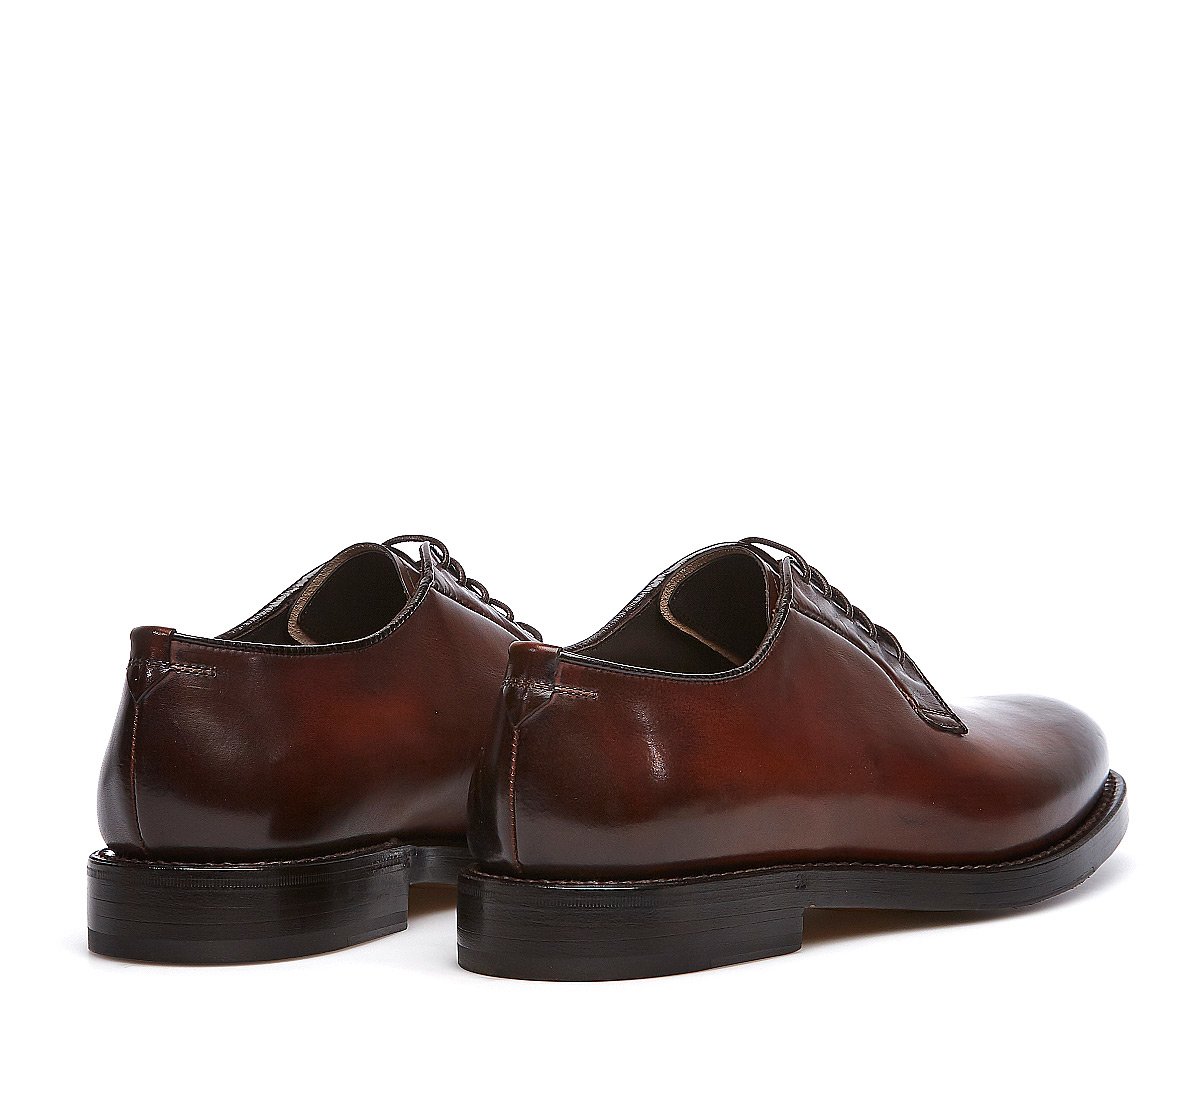 Goodyear Flex lace-ups in hand-buffed calf leather